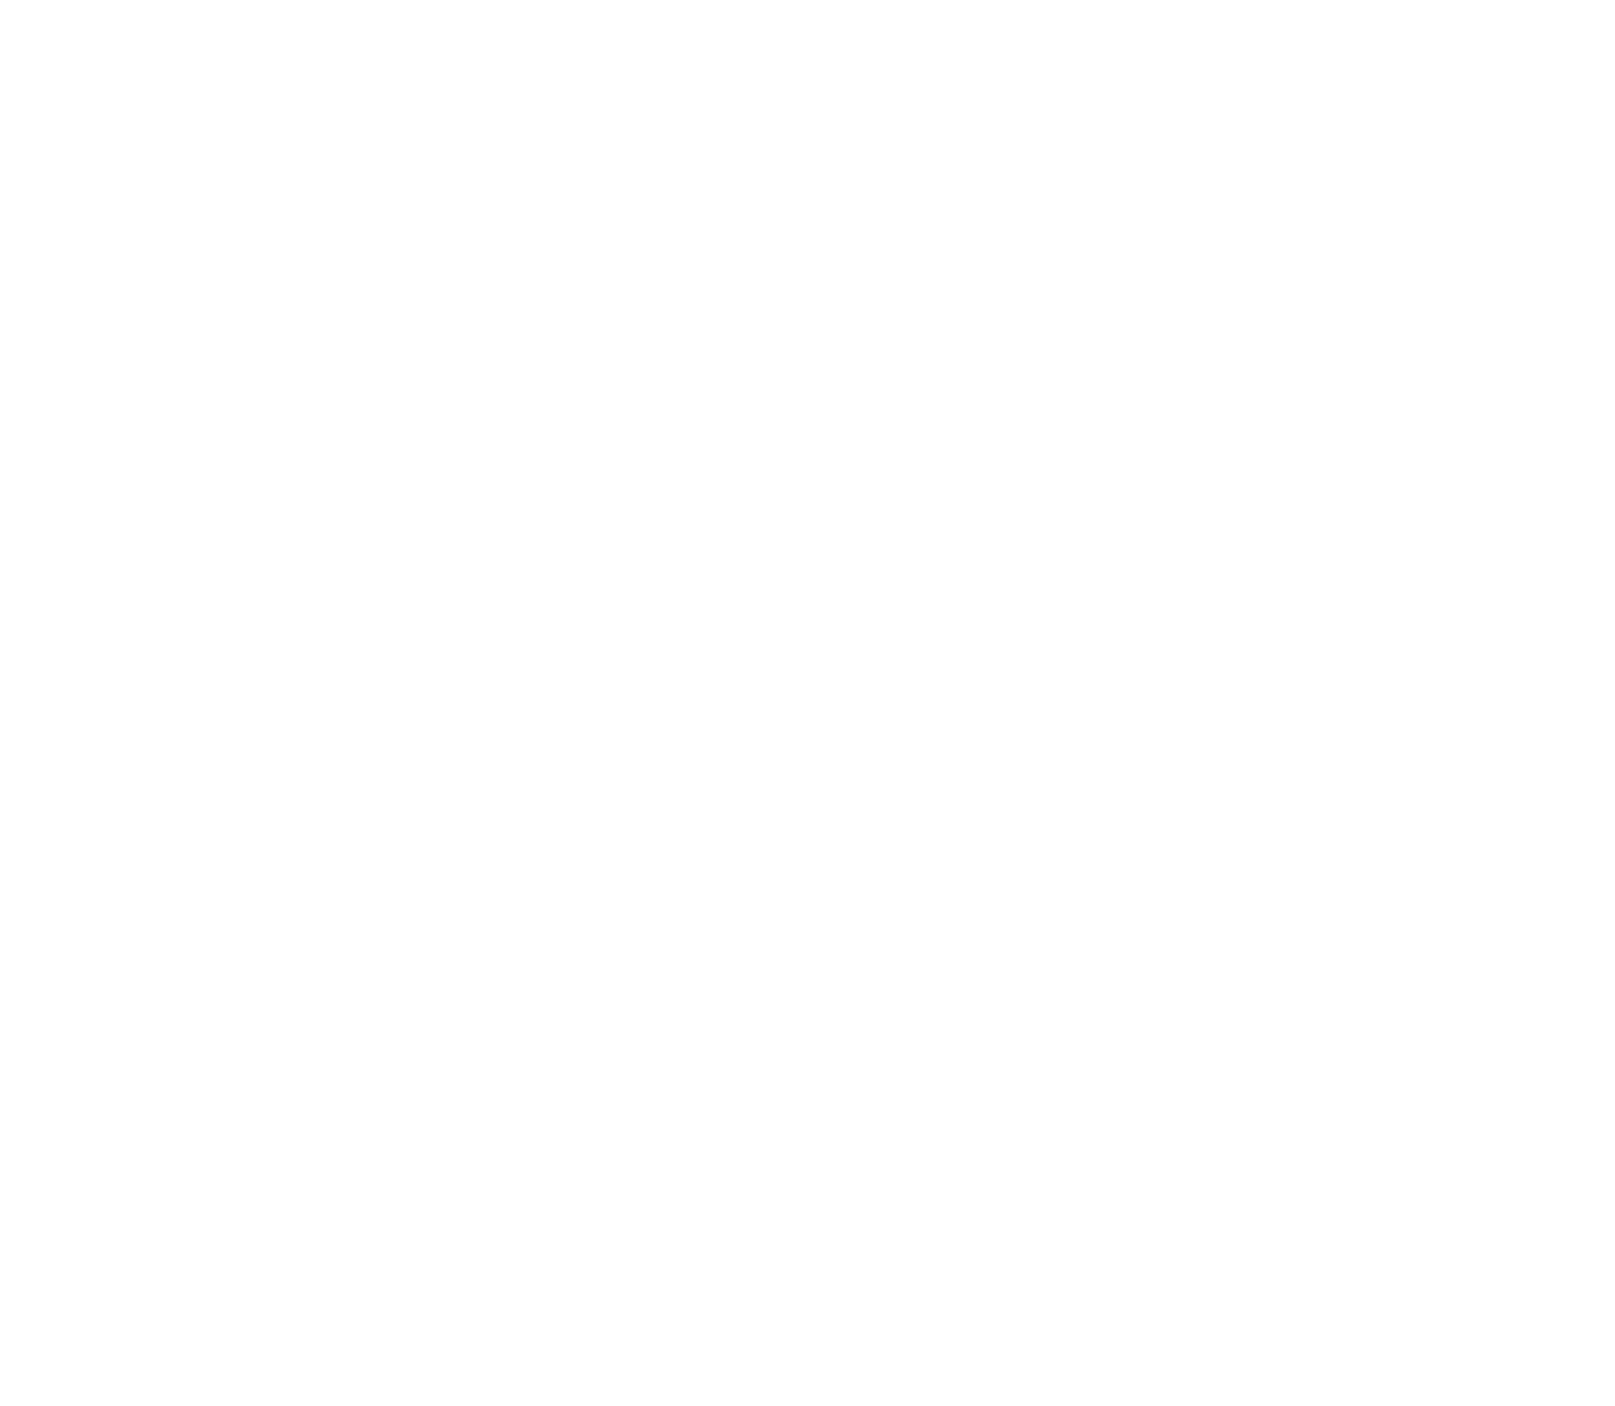 ISS A/S logo for dark backgrounds (transparent PNG)